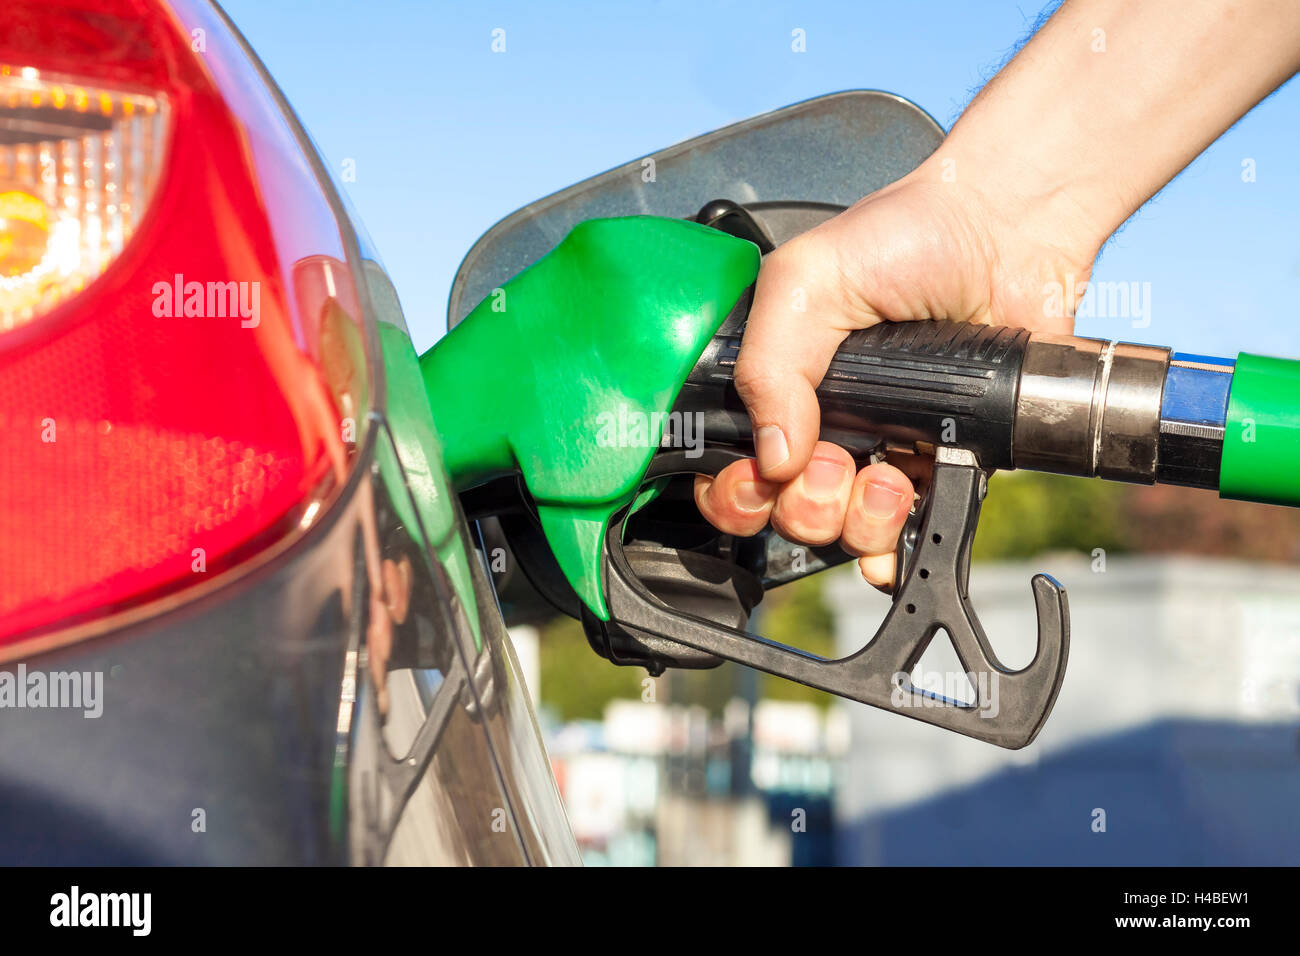 Refueling car tank with oil or gas Stock Photo